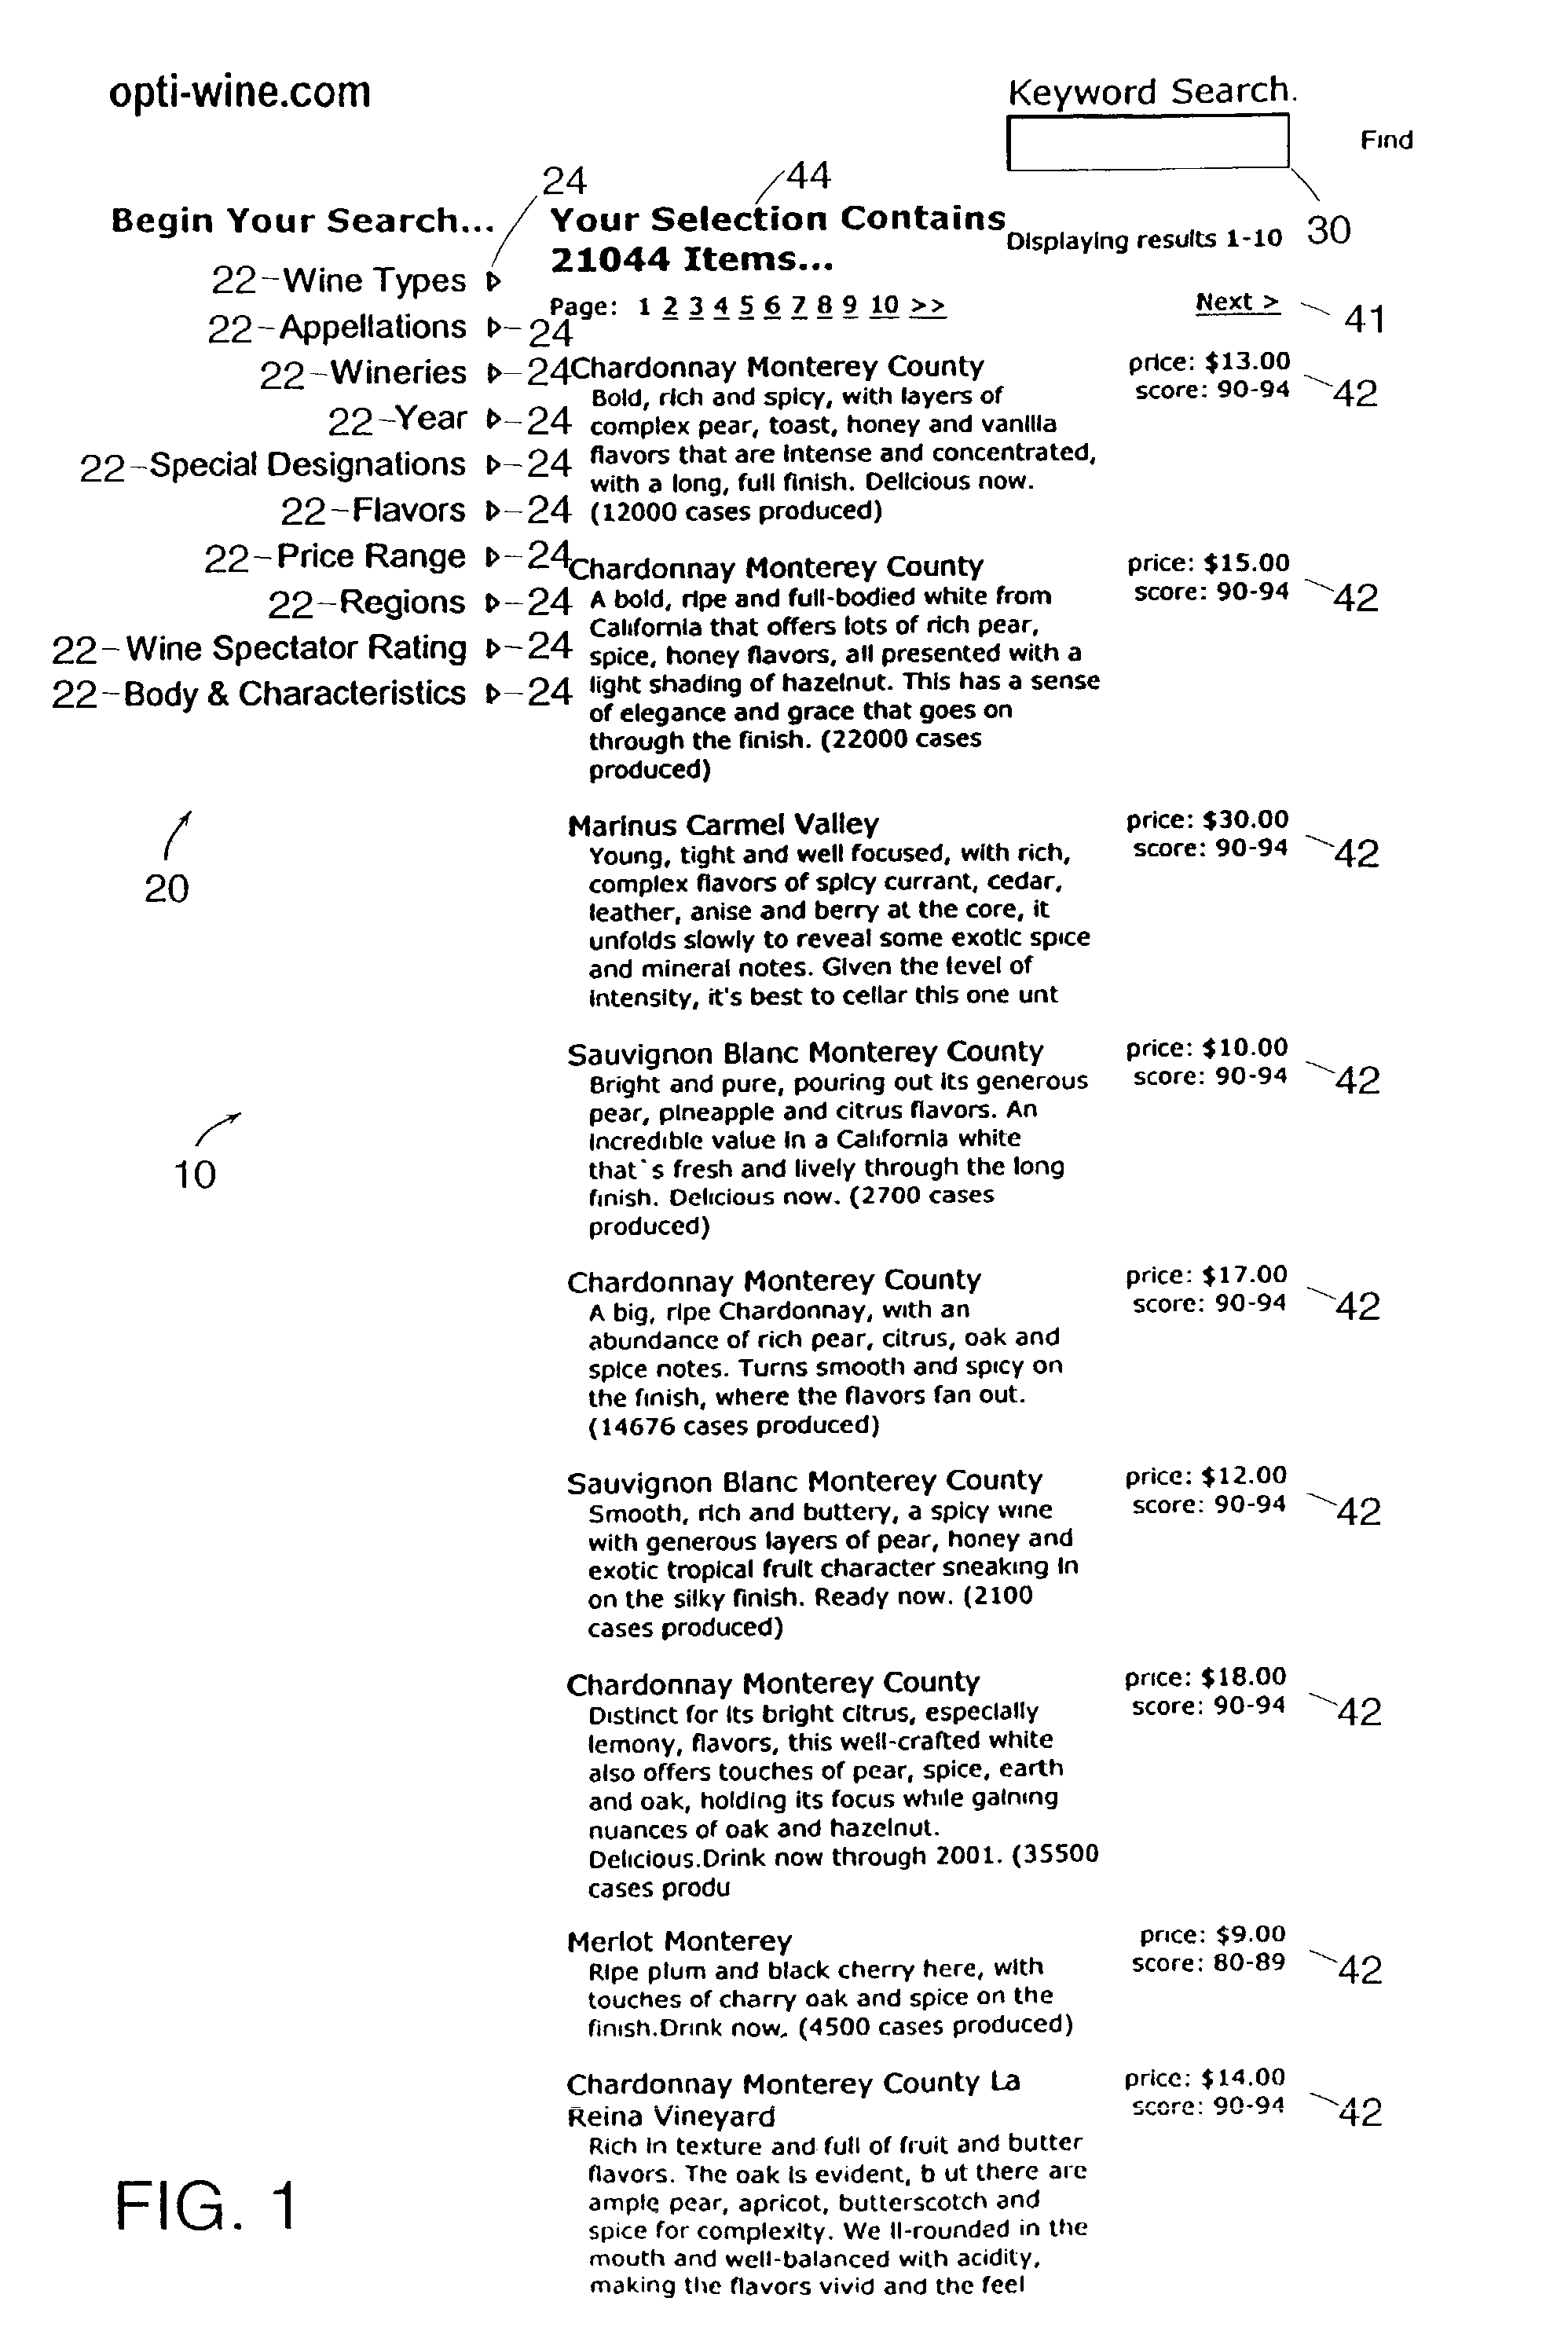 System and method for manipulating content in a hierarchical data-driven search and navigation system